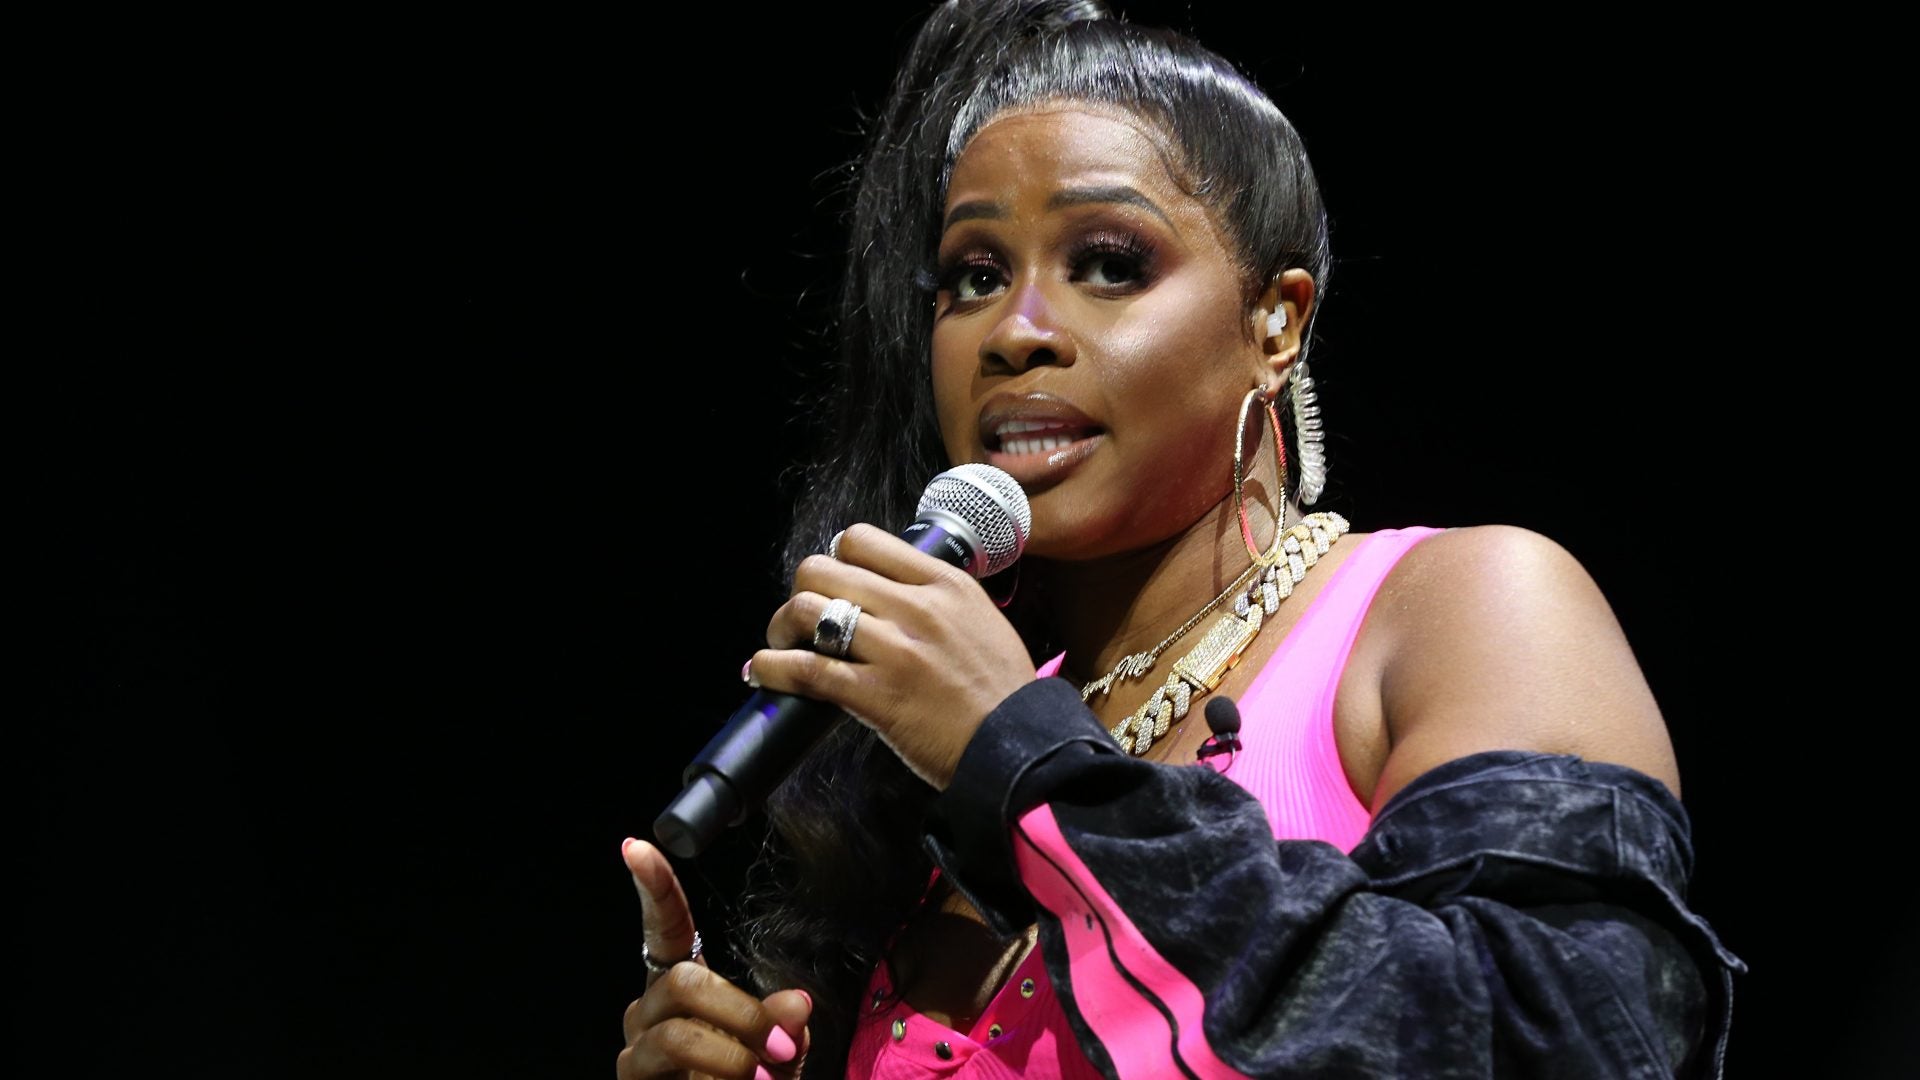 WATCH: Remy Ma Defends Nicki Minaj On This Week's 'State of the Culture'